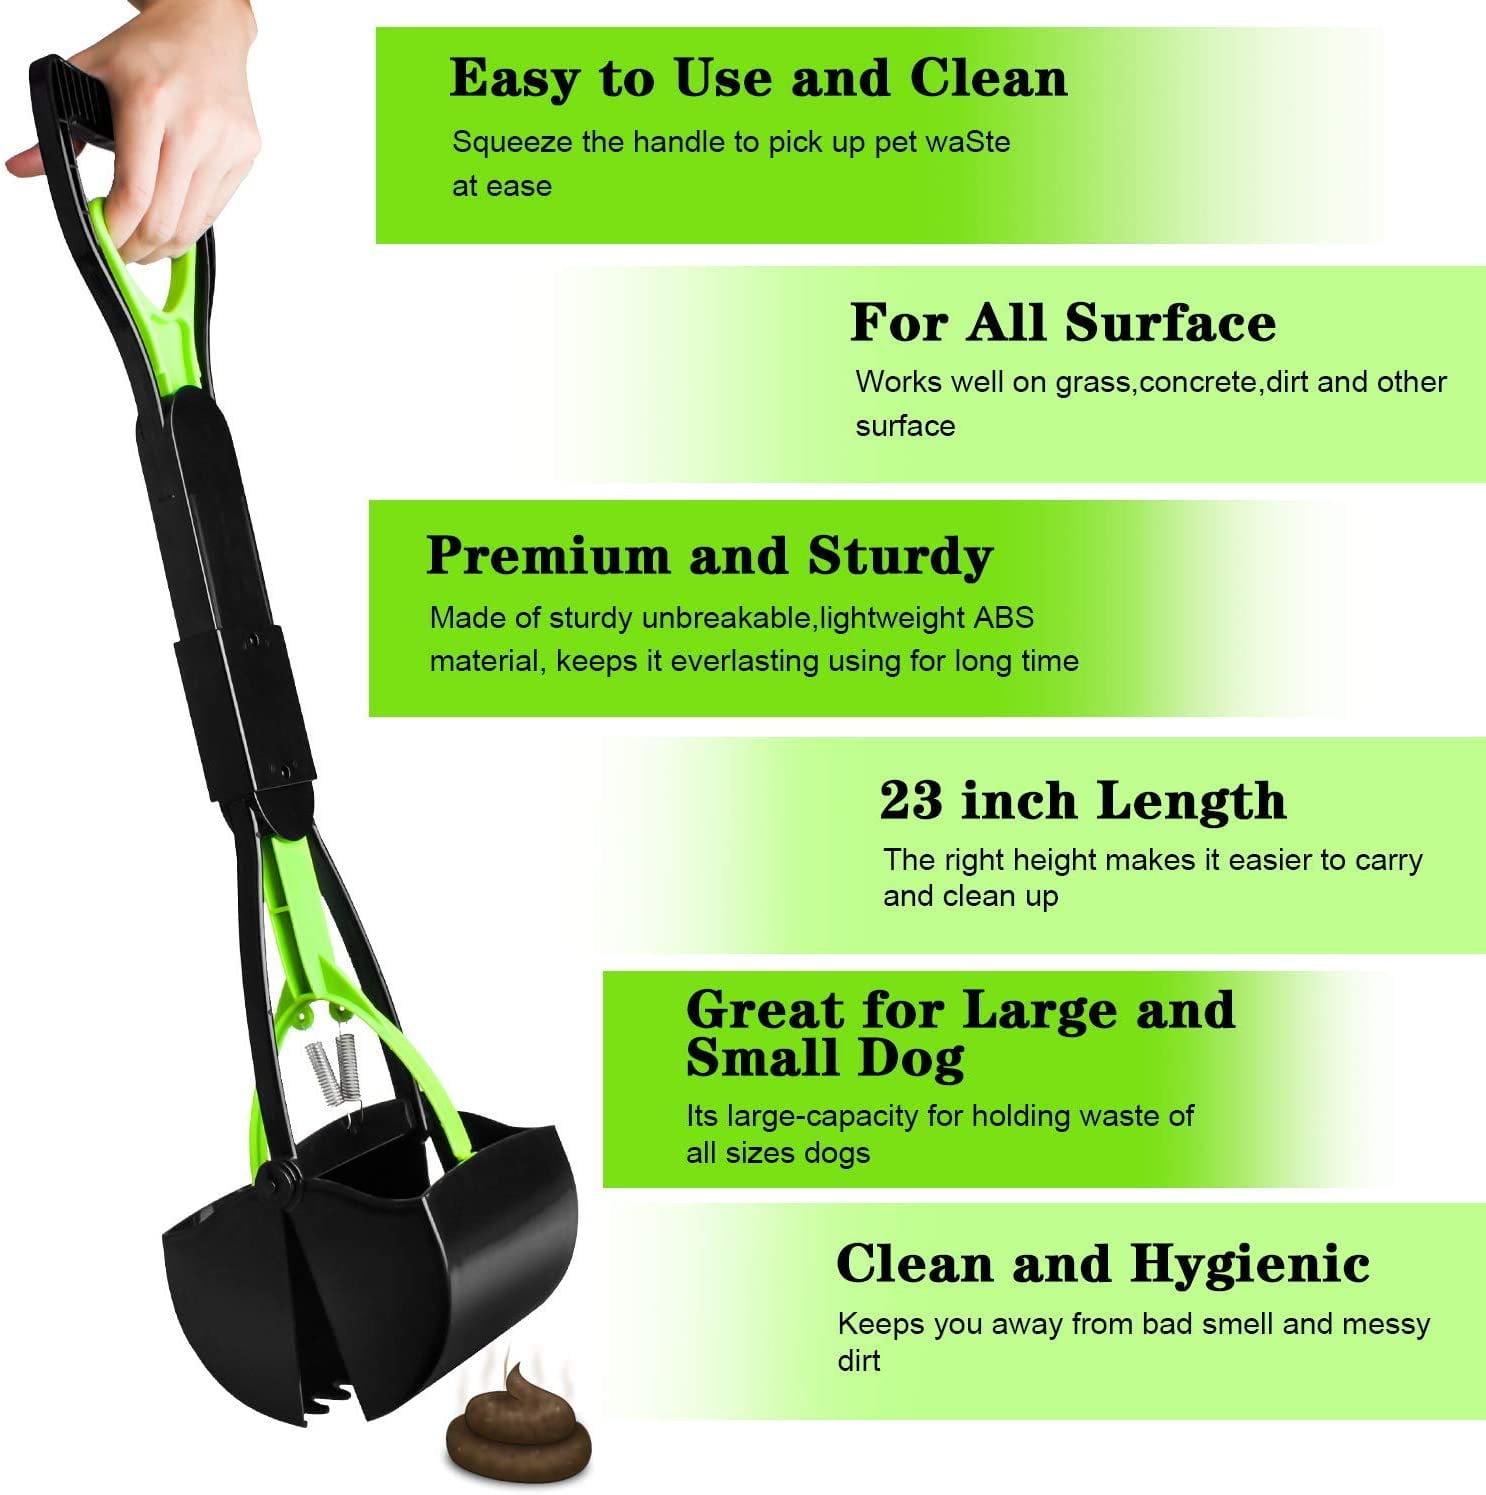 TIMINGILA 28 Long Handle Portable Pet Pooper Scooper for Large and Small Dogs,High Strength Material and Durable Spring,Great for Lawns Grass Gravel Dirt 